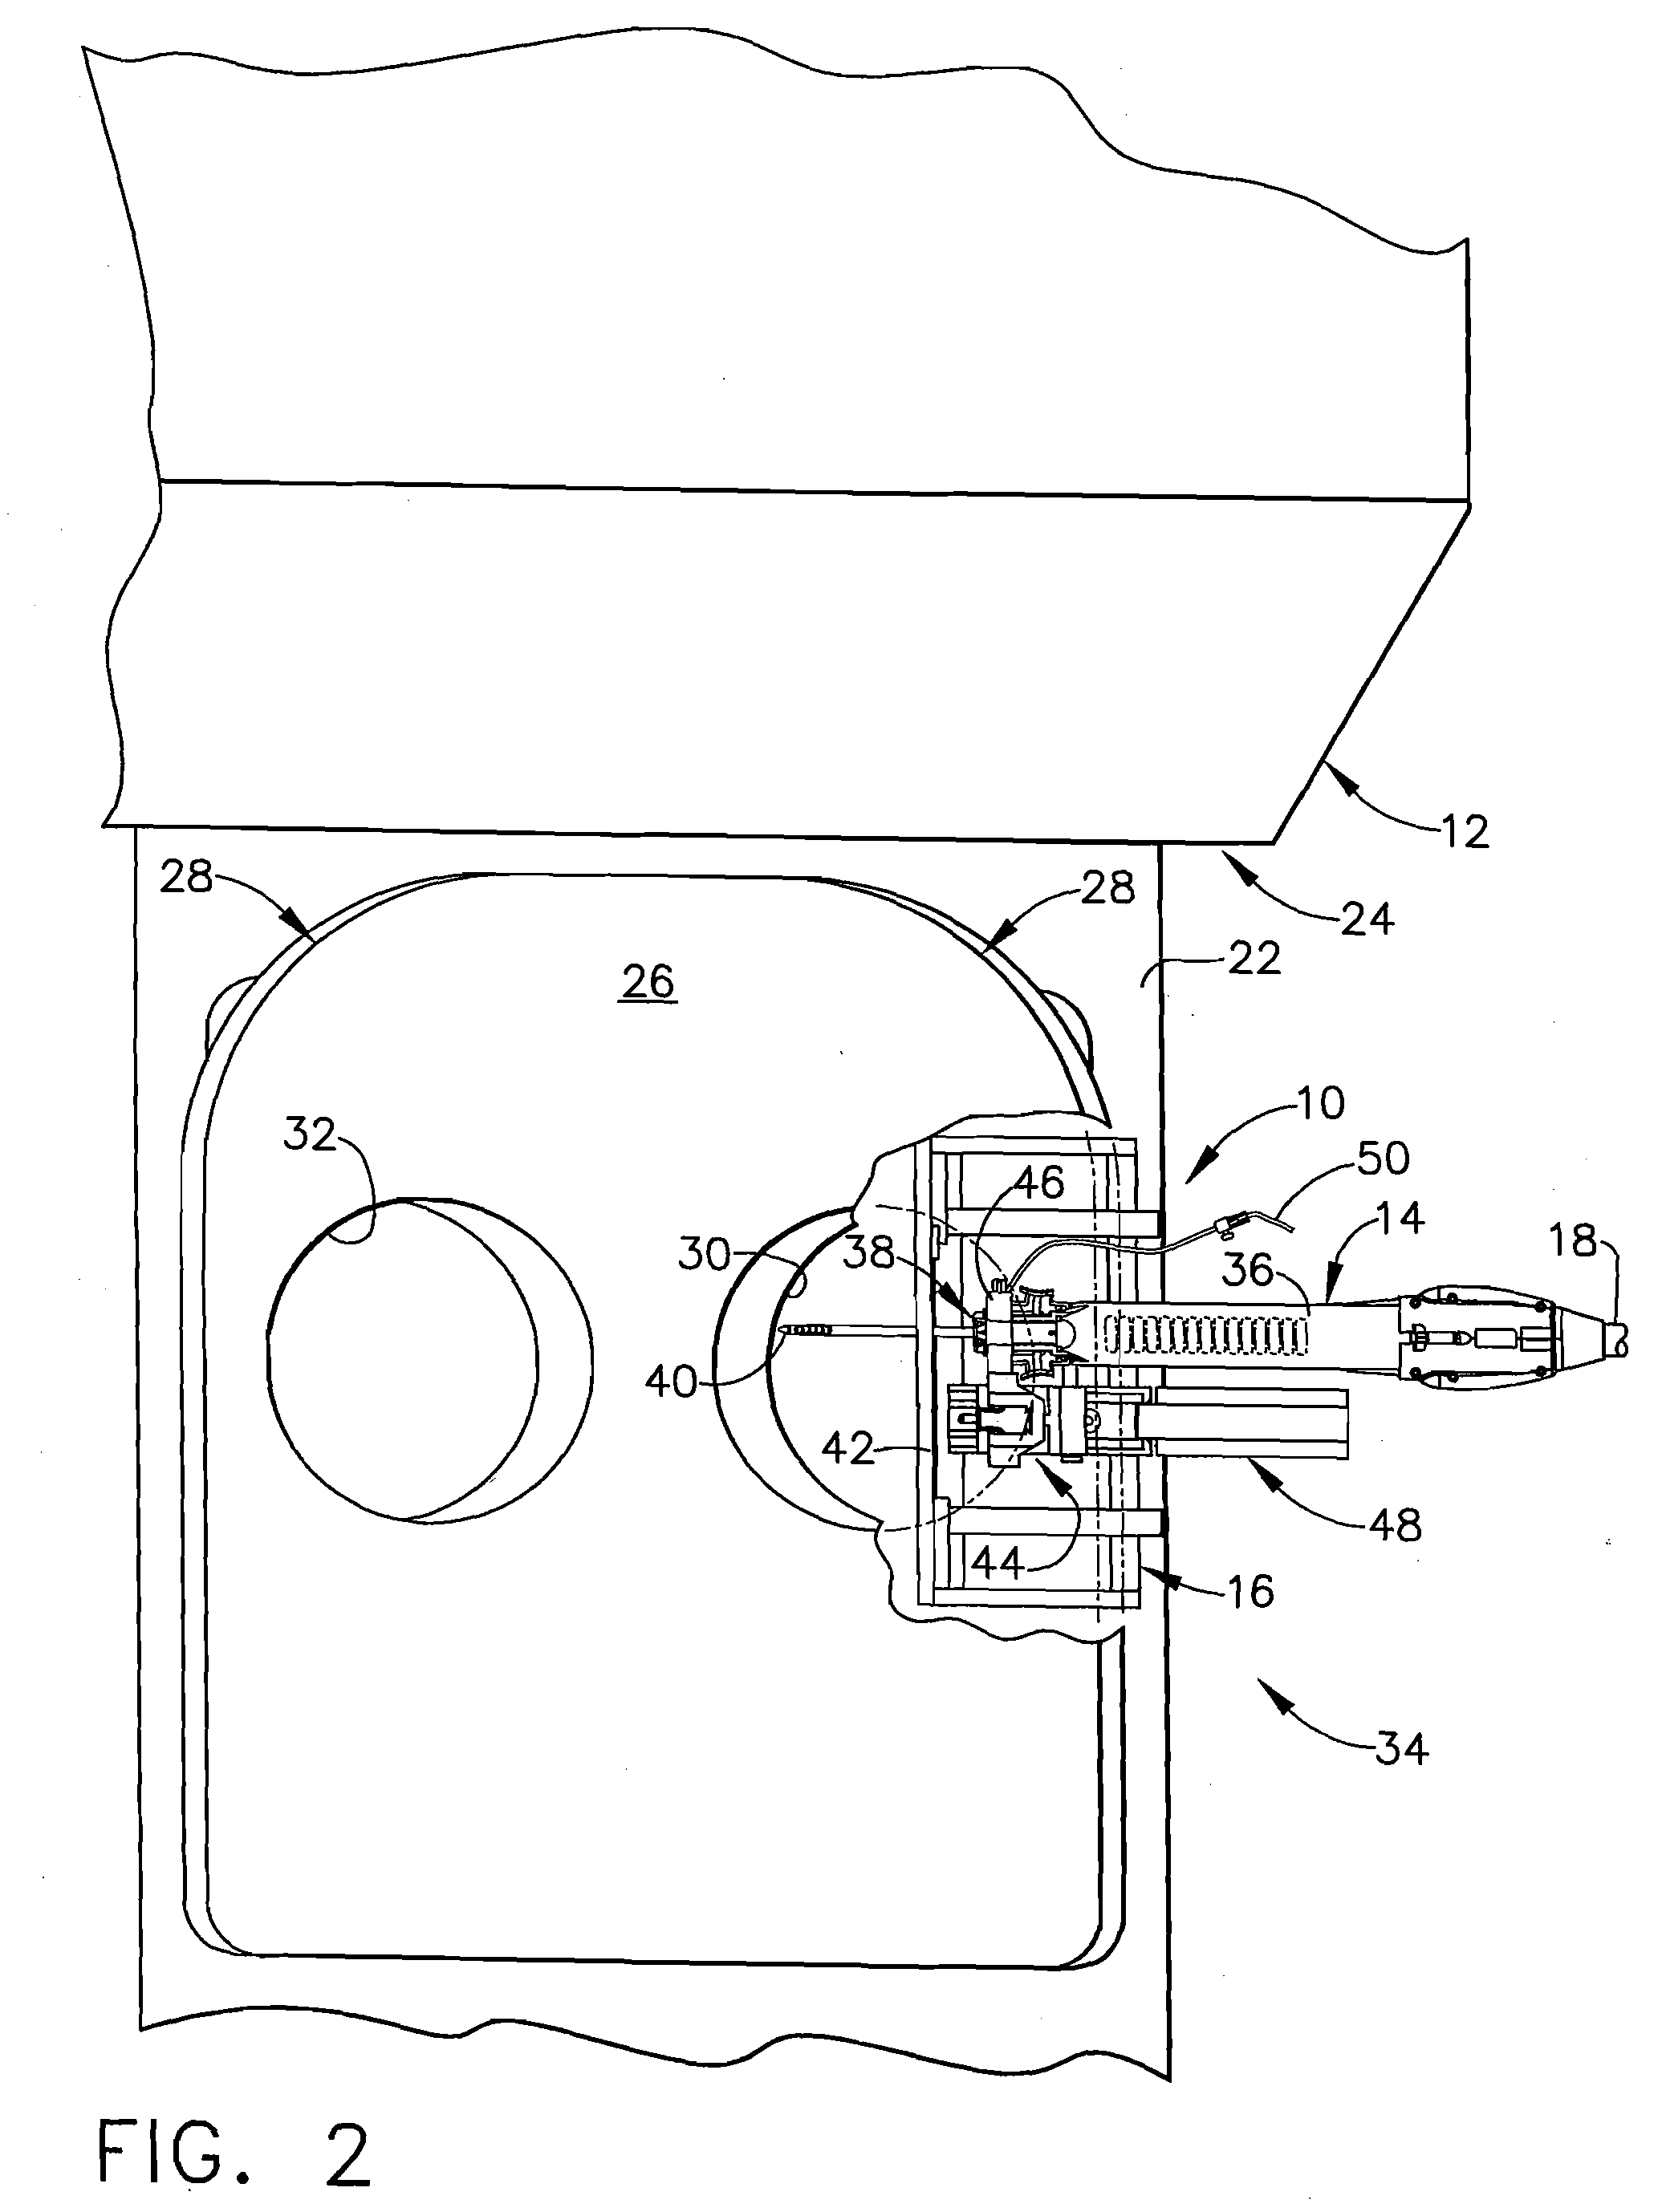 Localization mechanism for an MRI compatible biopsy device